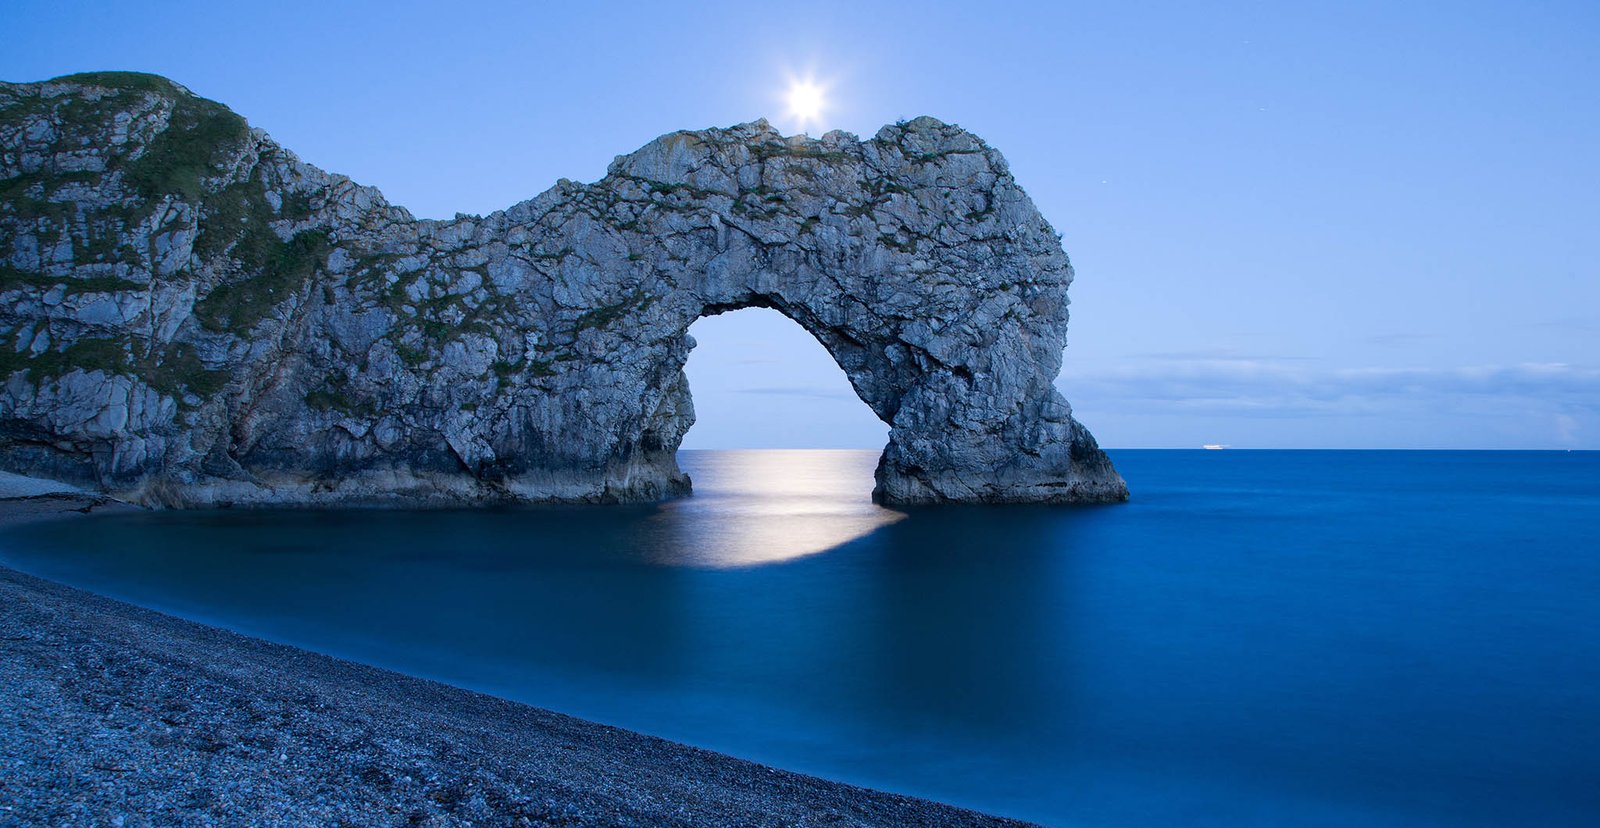 Durdle Door in the moonlight, Dorset, England. Captured late evening as the moonlight flooded through the rock's archway. Durdle door is one of the many stunning locations to visit on the Jurassic coast in southern England.